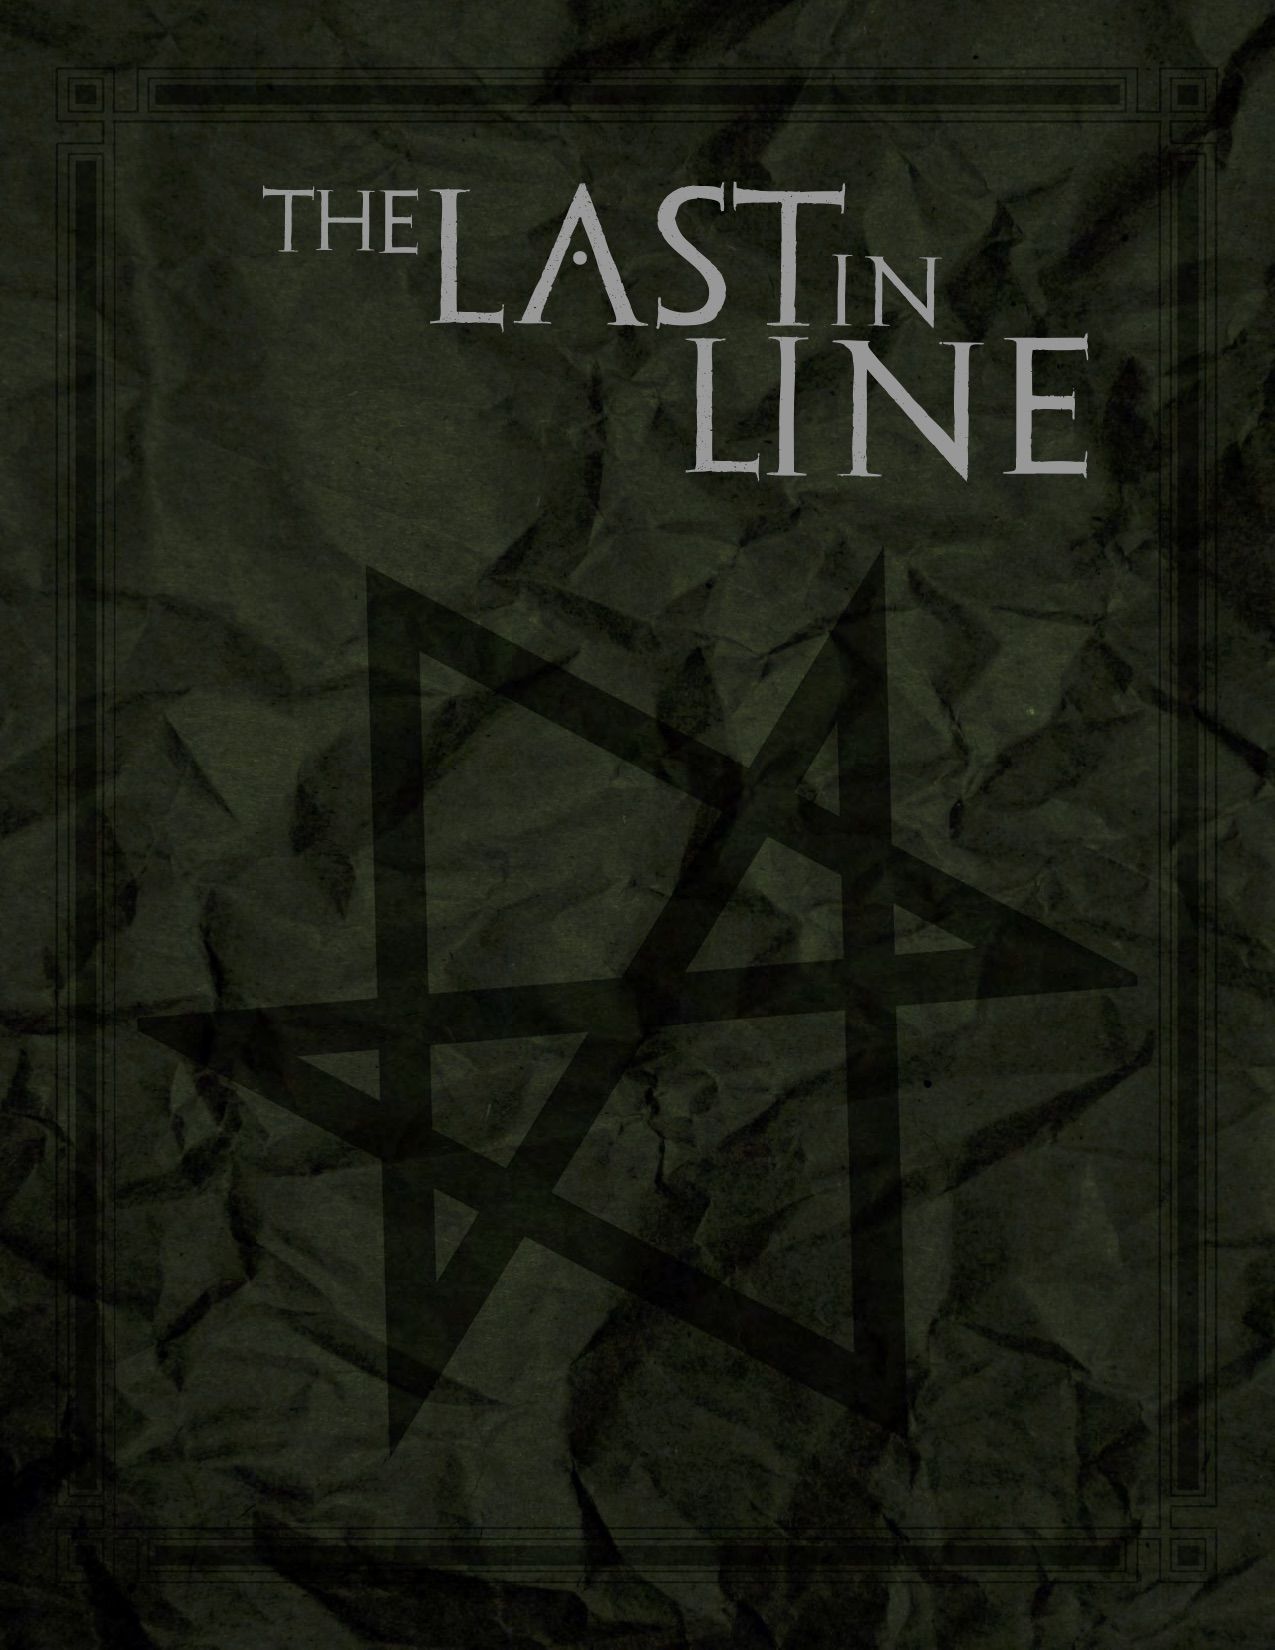 THE LAST IN LINE